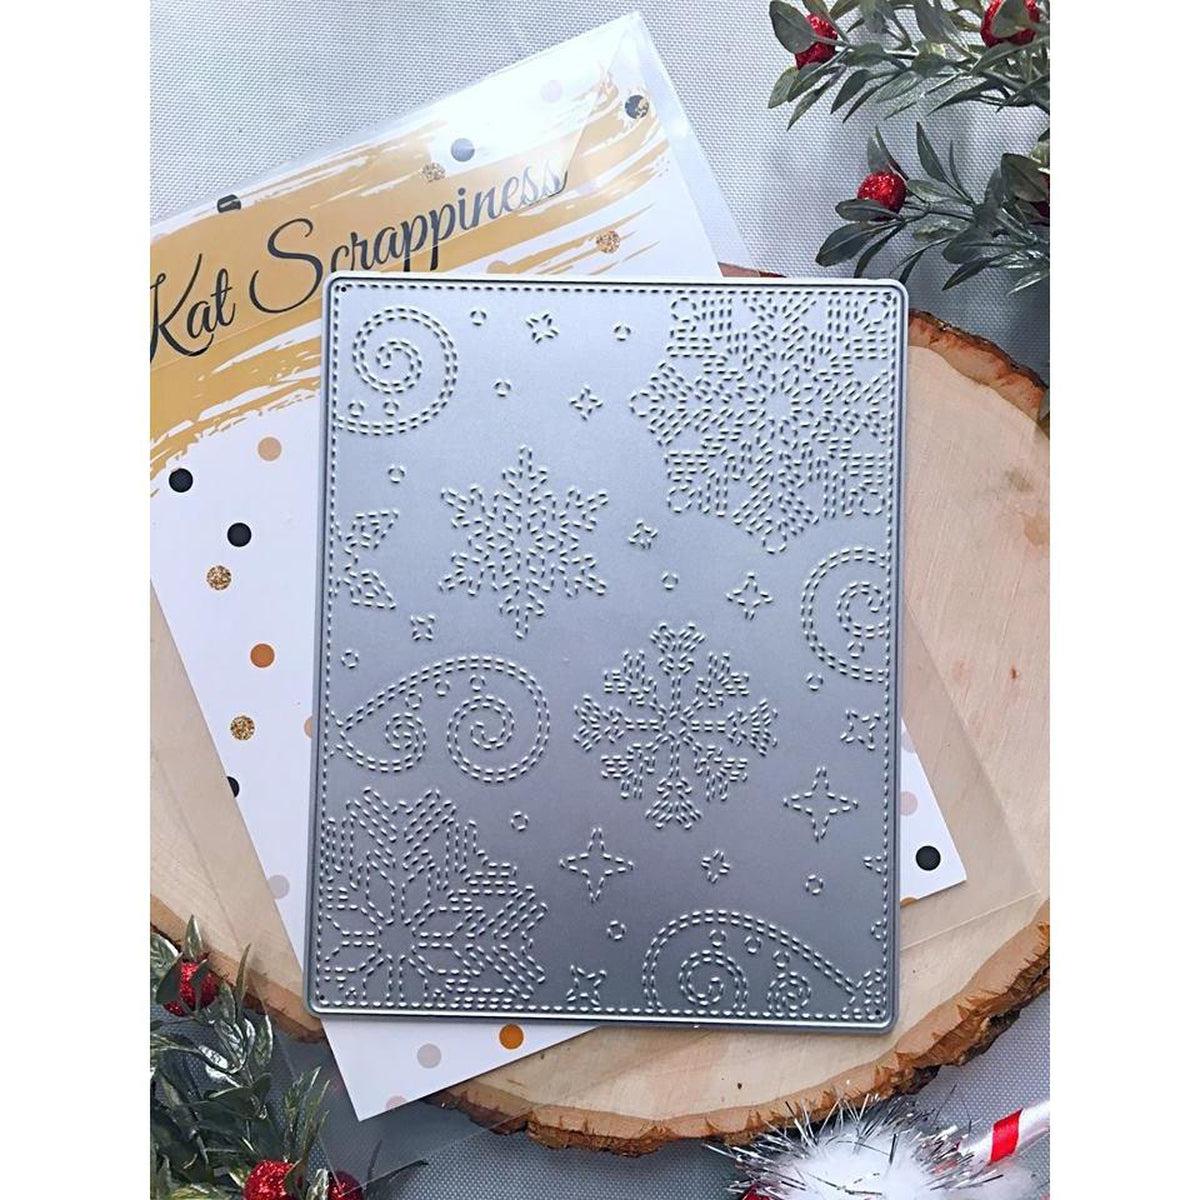 Stitched Winter Swirl Backdrop Die by Kat Scrappiness - Kat Scrappiness